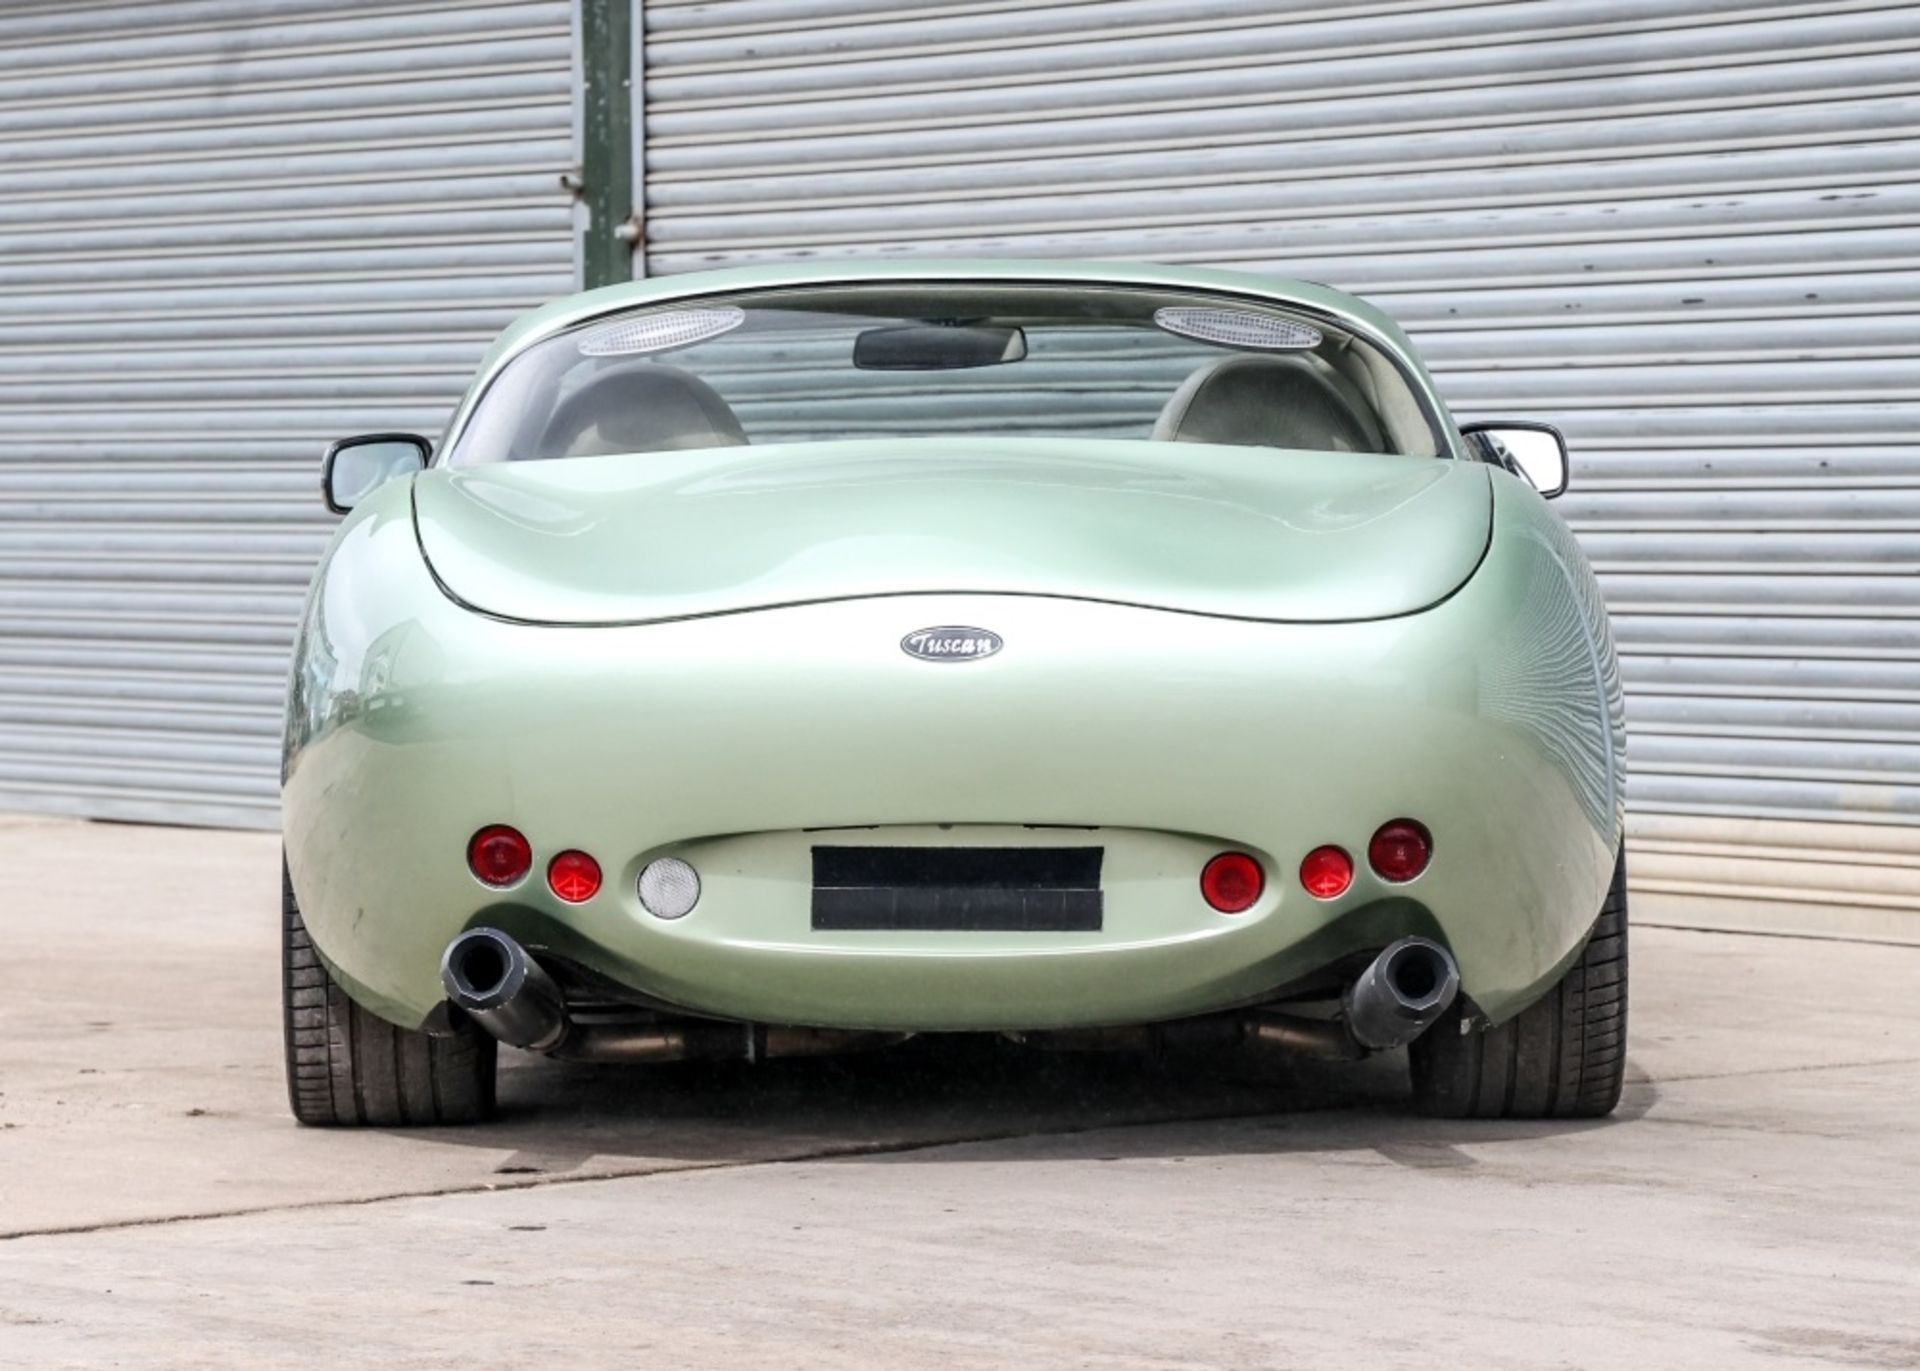 2001 TVR Tuscan Speed Six - Image 10 of 15